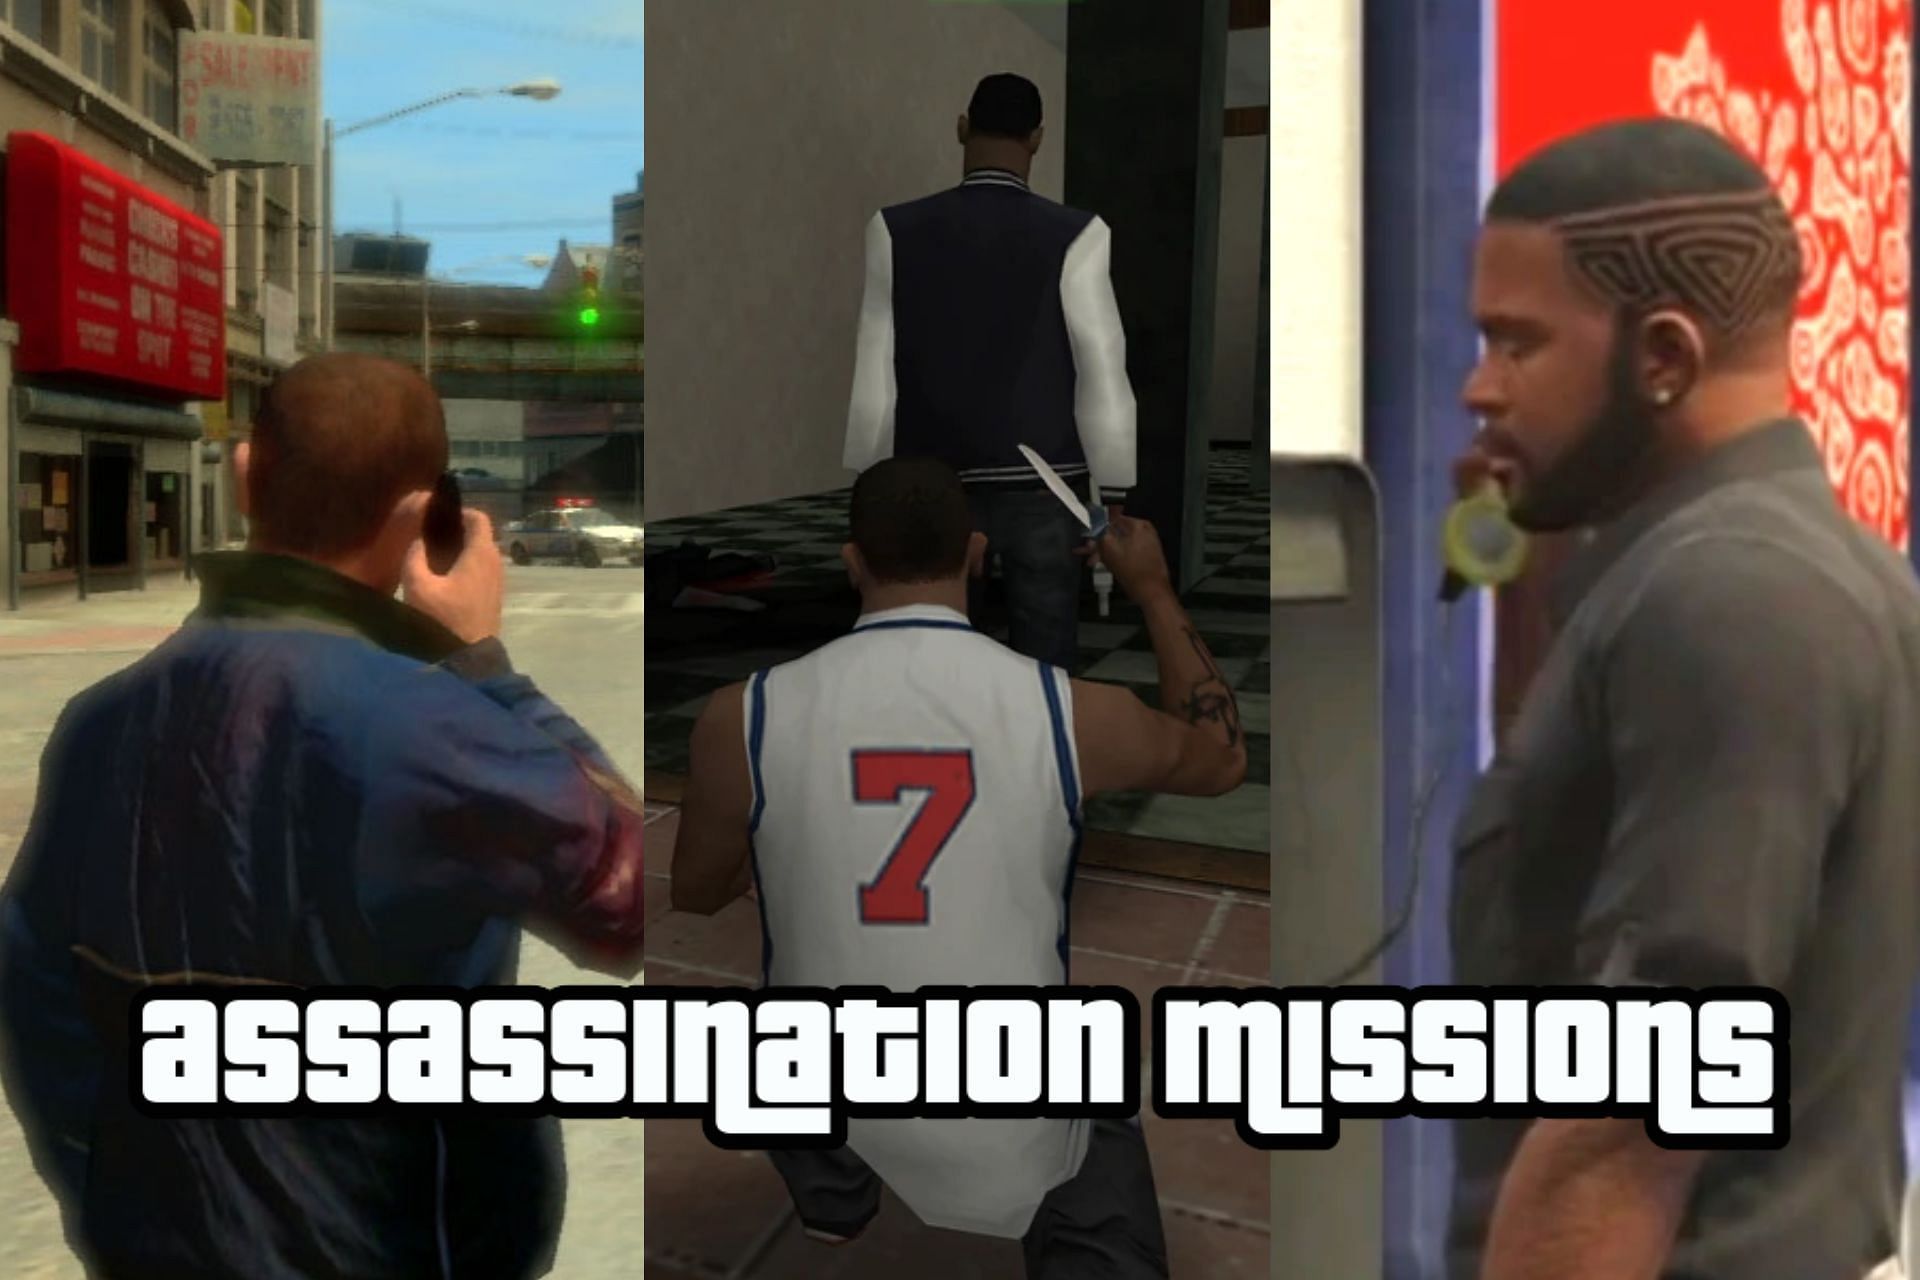 Players should try these missions in GTA games for an assassin-like experience (Image via Sportskeeda)